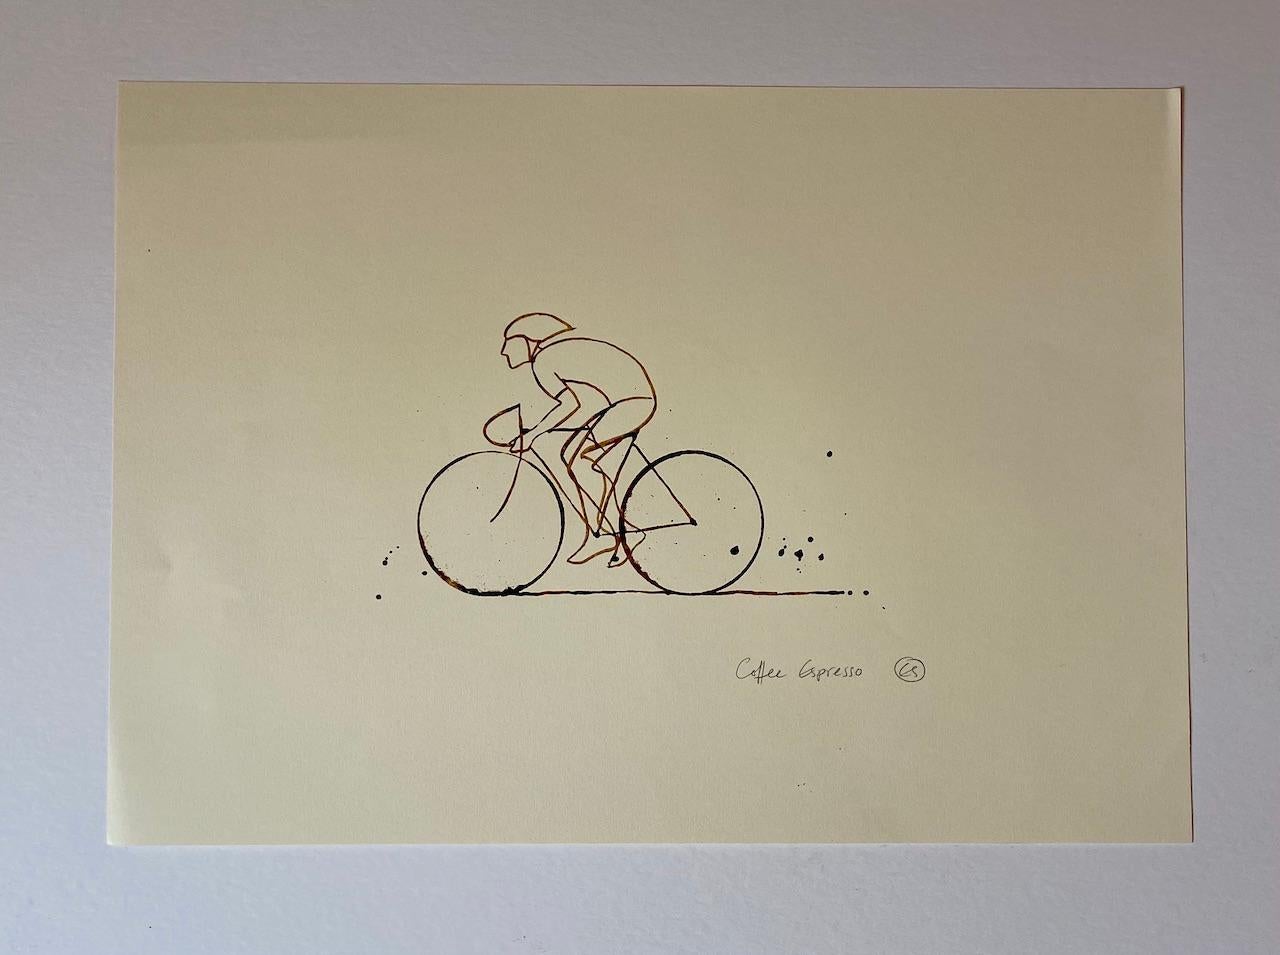 Coffee Espresso Series 2 is an original artwork by Eliza Southwood. It features one cyclist
Eliza Southwood cycling prints available for sale with Wychwood art online and in our Deddington art gallery. Eliza Southwood is a former architect, studied